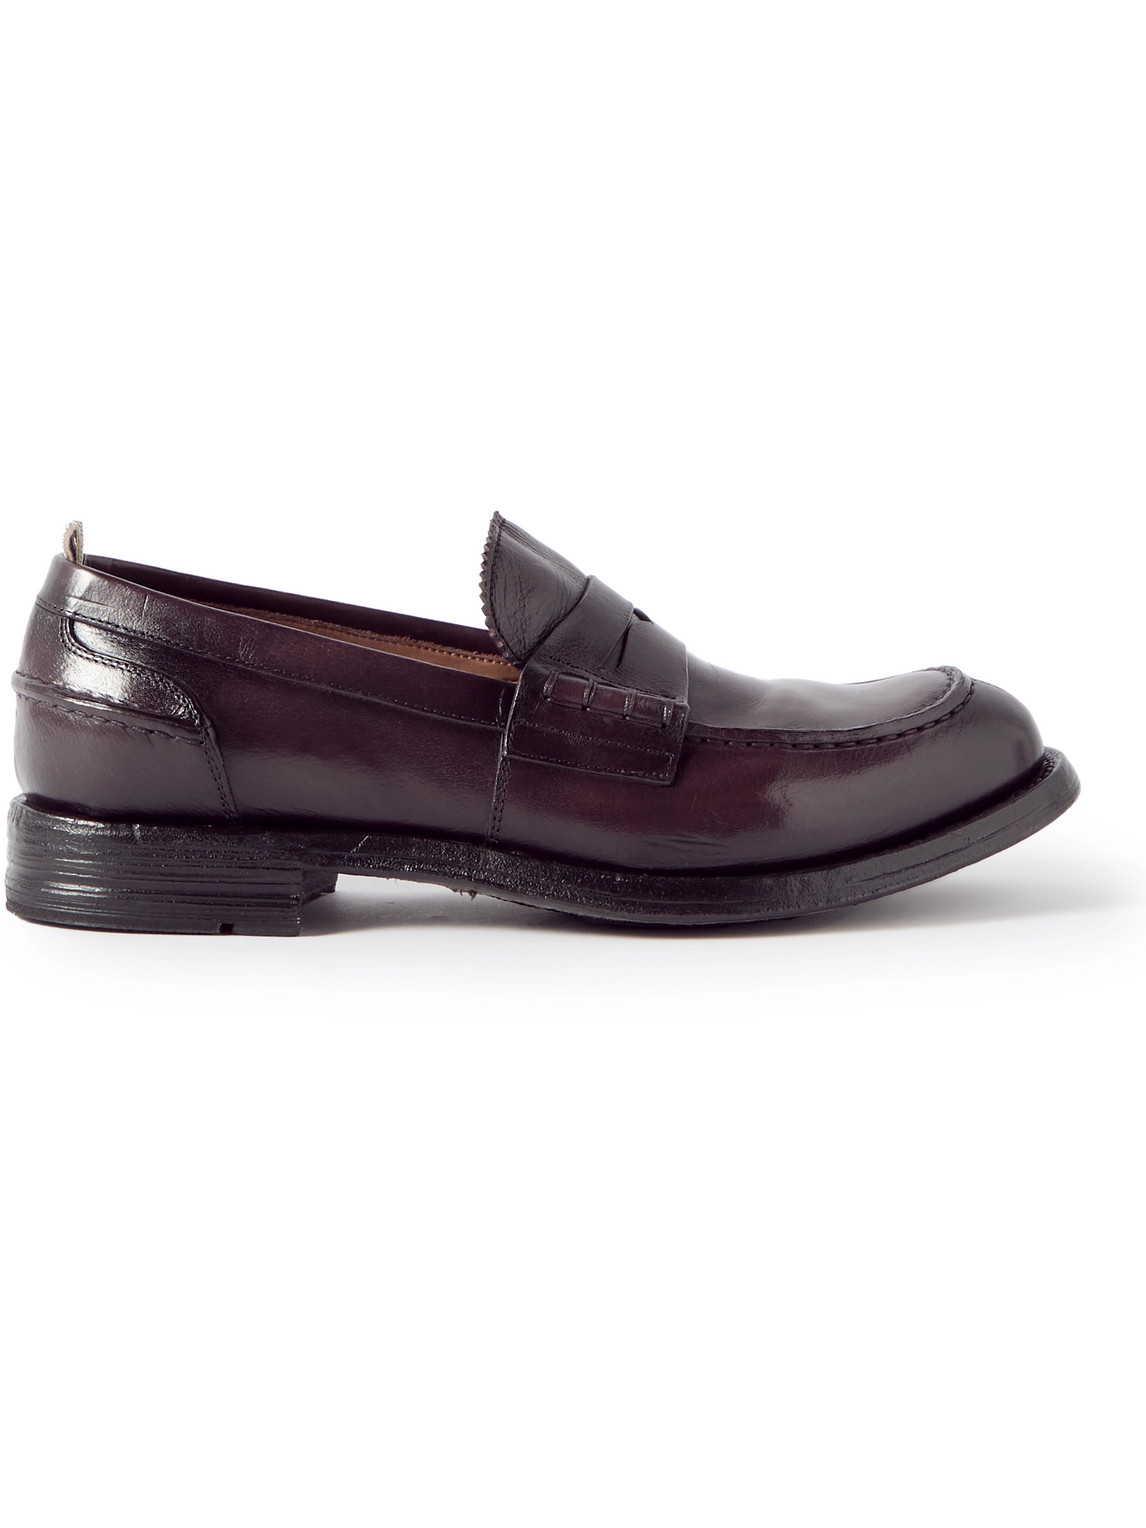 Officine Creative Balance Leather Penny Loafers